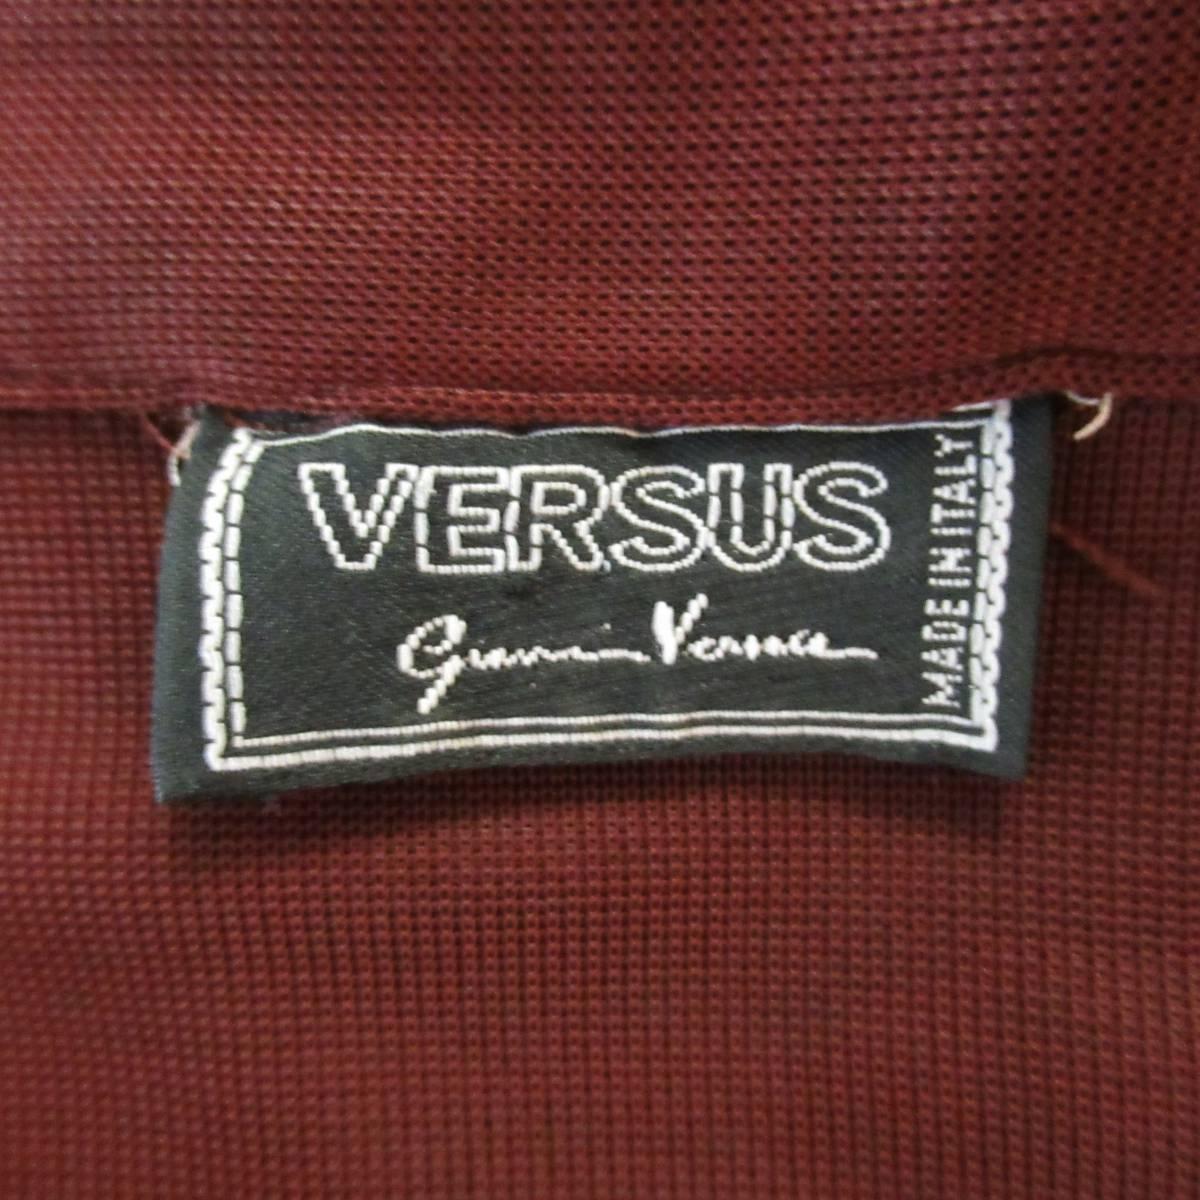 VERSUS by GIANNI VERSACE Size L Maroon Polimide Ruffle Trim Long Sleeve Shirt 1